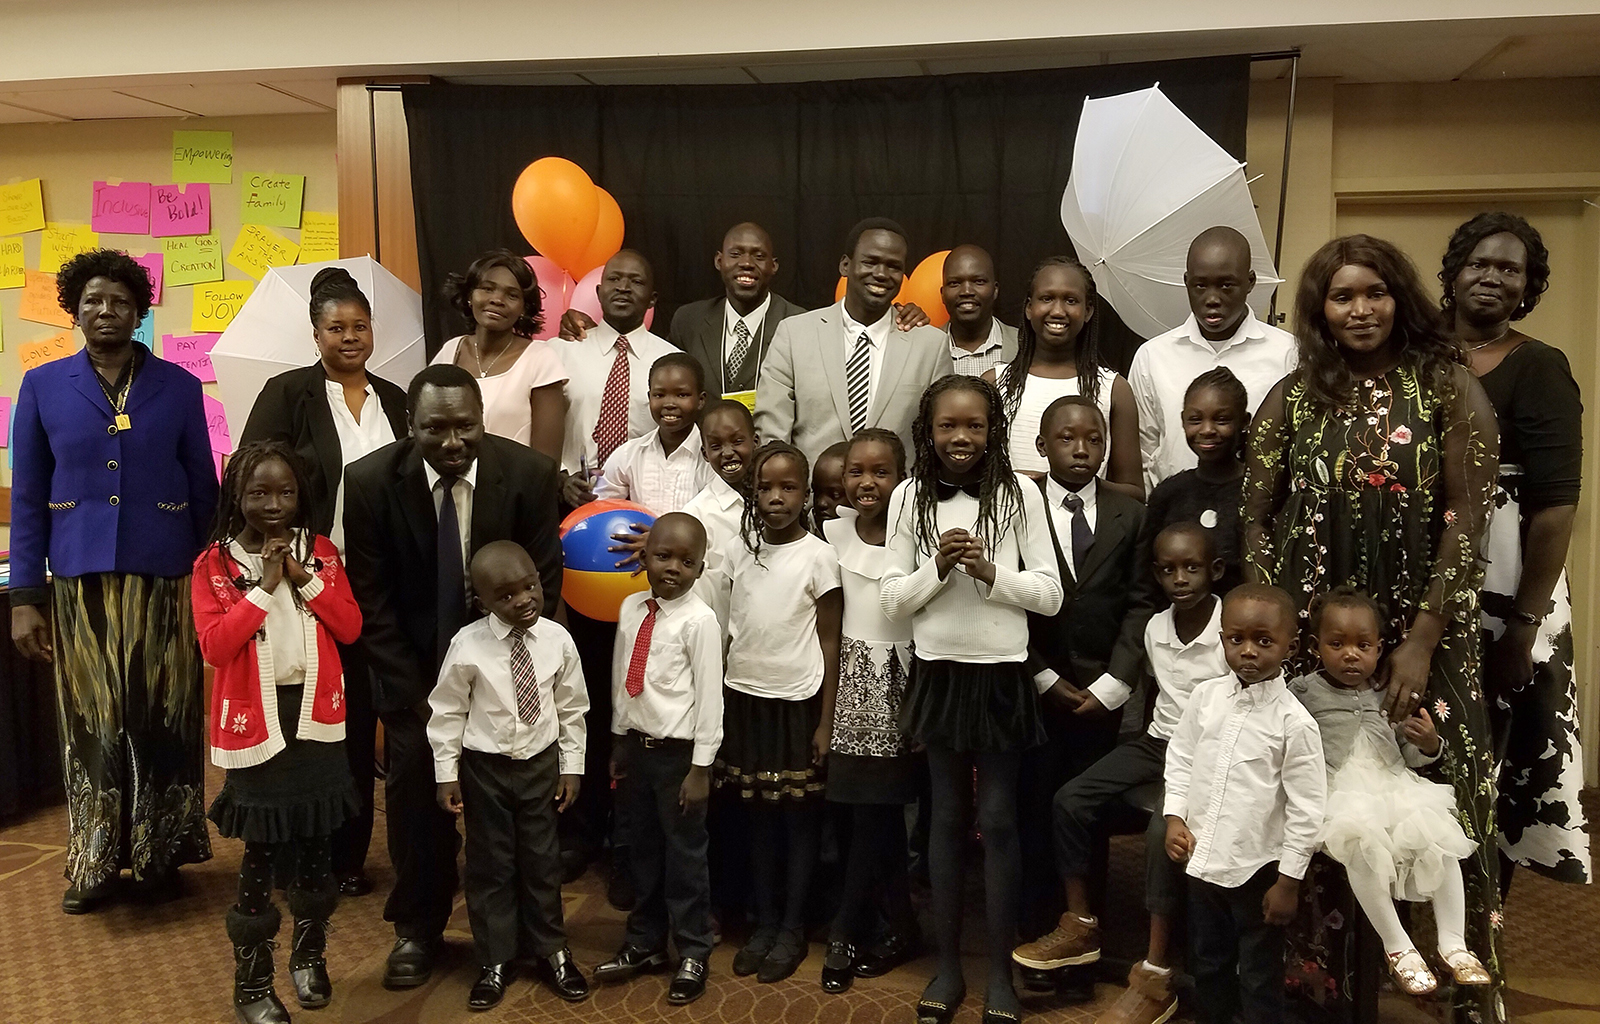 By resolution, the 151st Convention of the Diocese of Central New York recognized Diangdit Chapel, a congregation rooted in Syracuse’s South Sudanese refugee community, as a Mission Chapel of the Diocese. Photo provided by the Diocese of Central New York